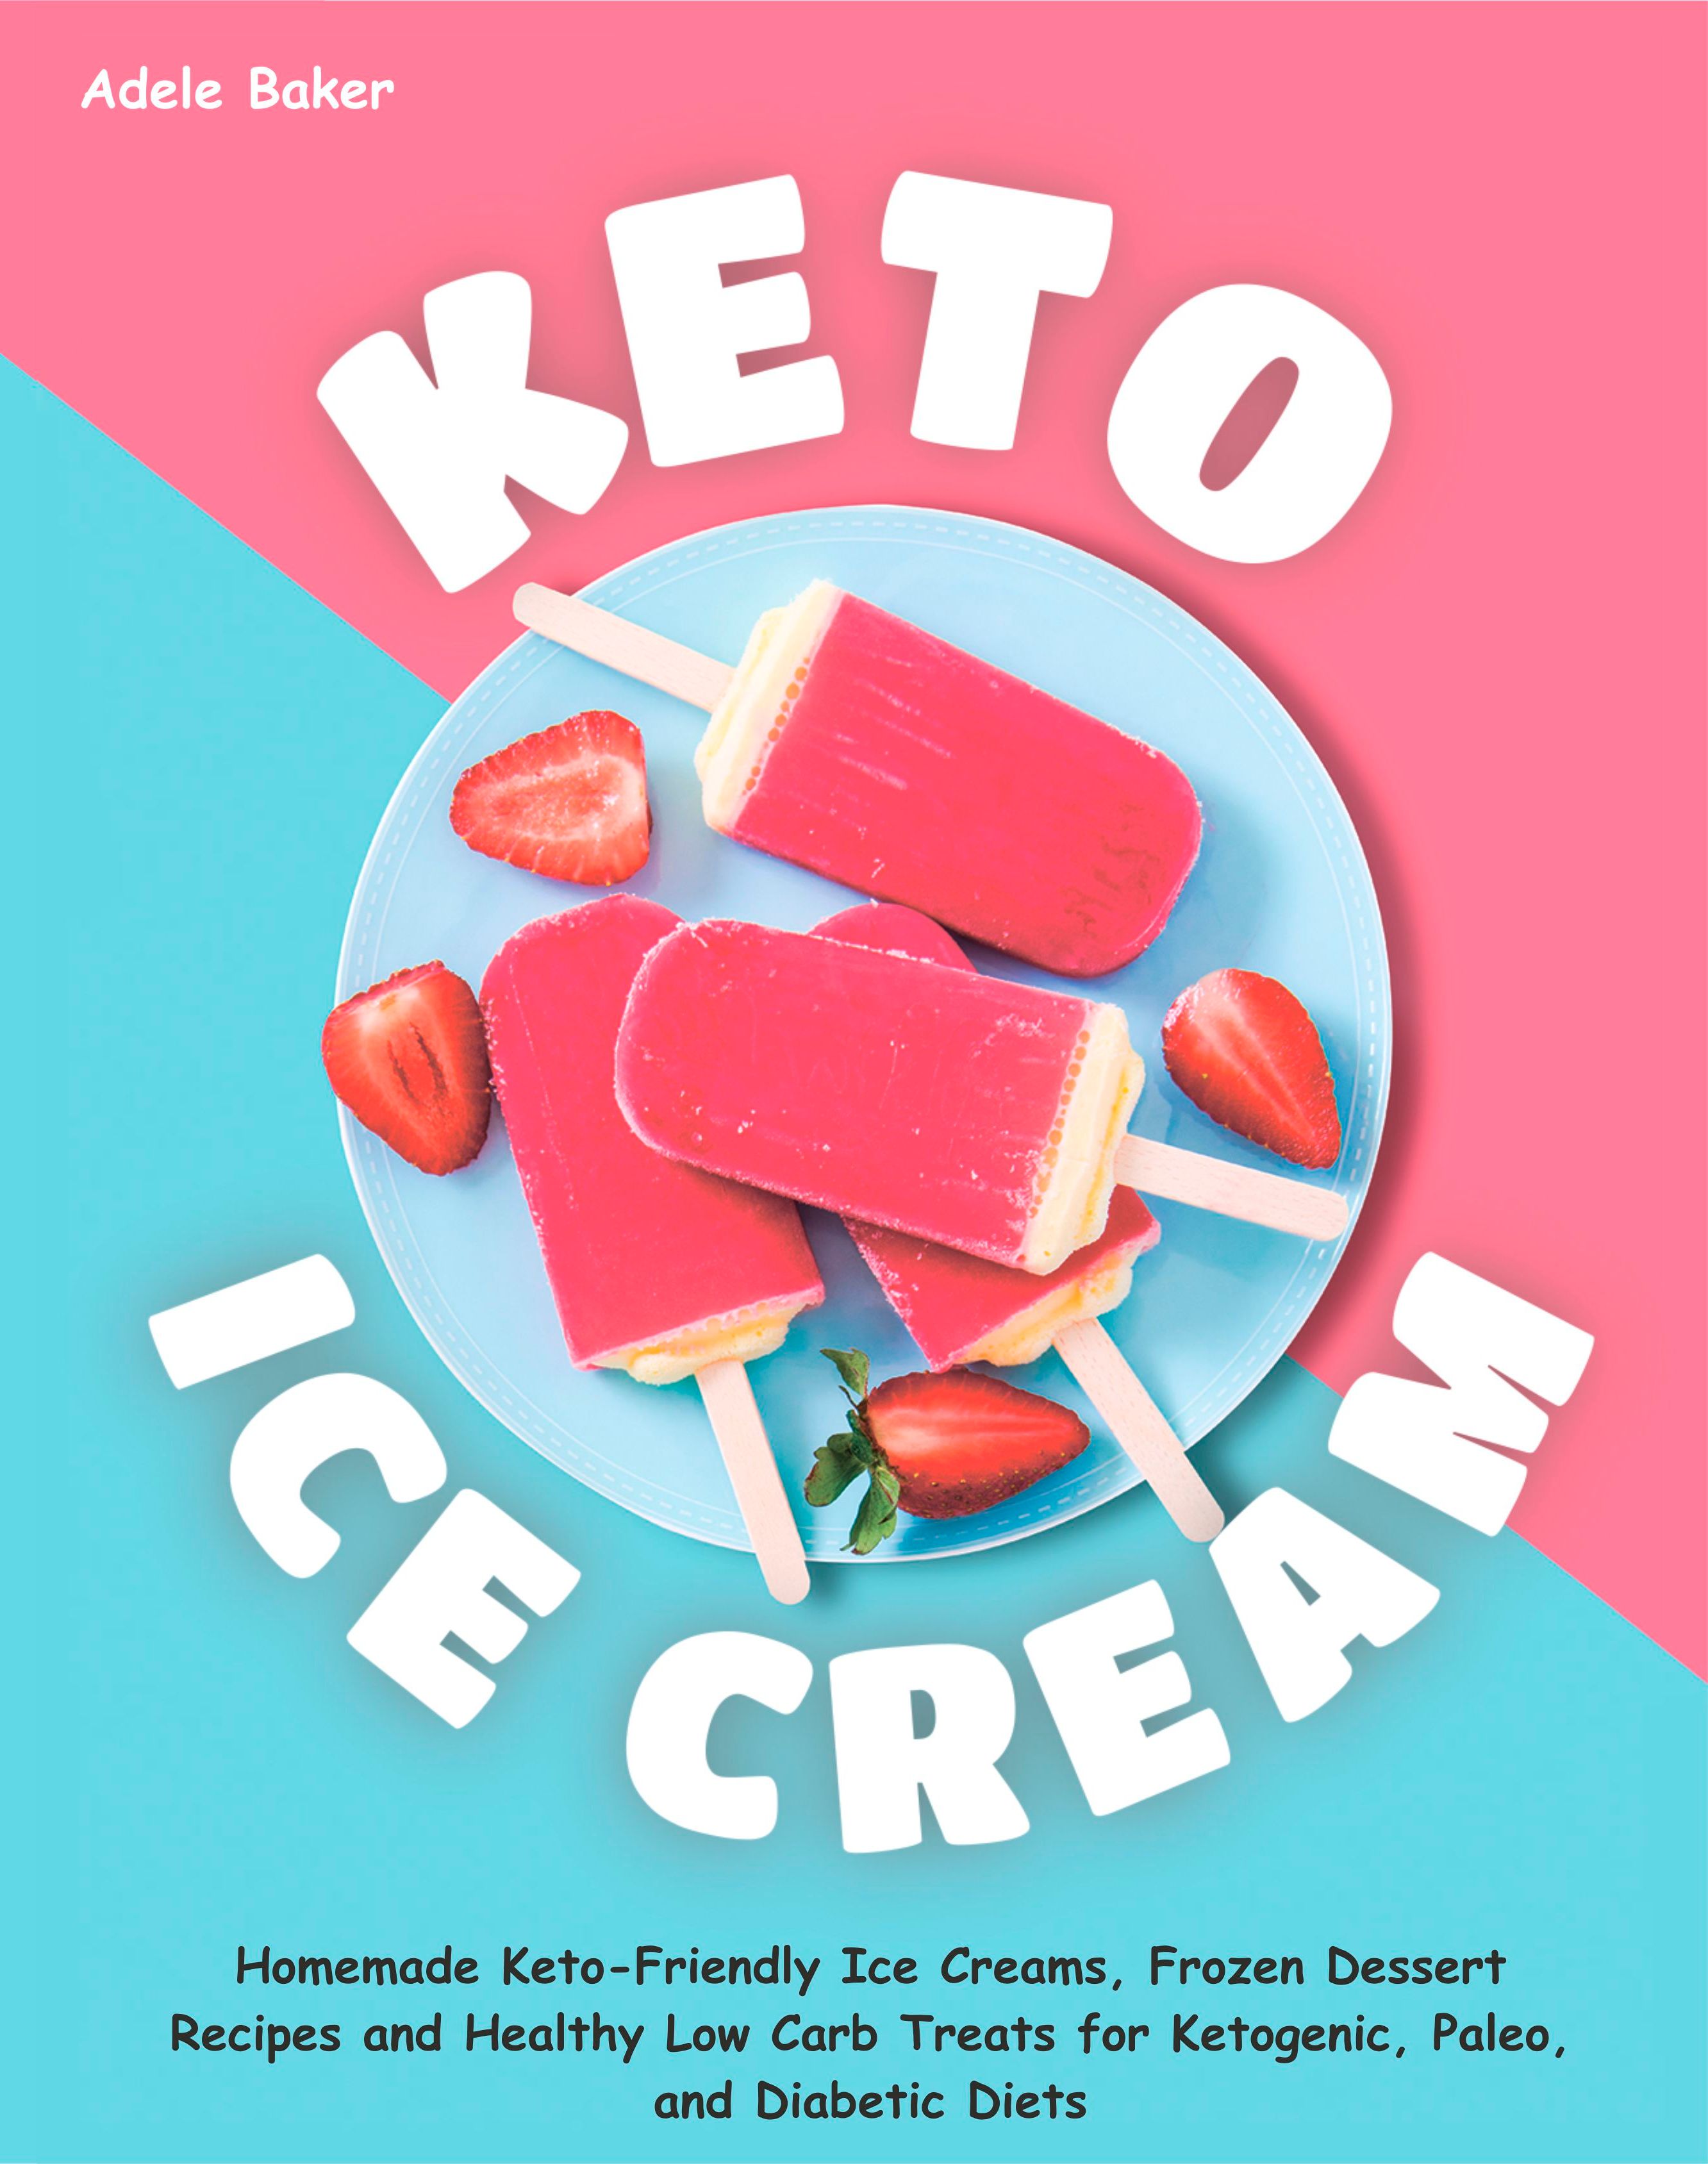 FREE: Keto Ice Cream: Homemade Keto-Friendly Ice Creams, Frozen Dessert Recipes and Healthy Low Carb Treats for Ketogenic, Paleo, and Diabetic Diets by Adele Baker